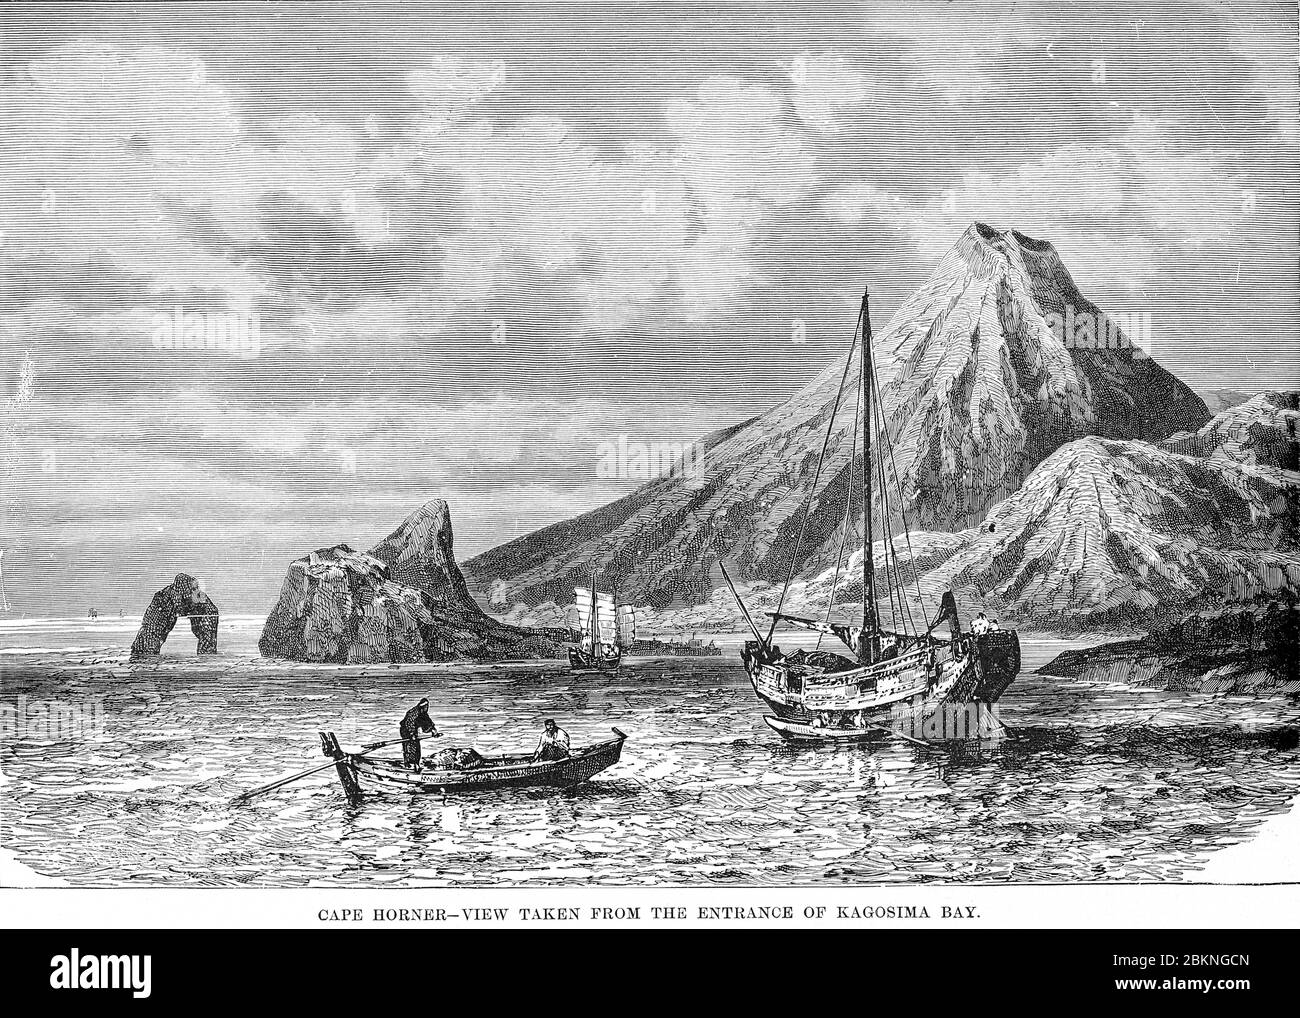 [ 1890s Japan - Japanese Boats in Kagoshima Bay ] —   Engraving from the end of the 19th century showing a view of Kagoshima Bay and Sakurajima.  Originally published in 'The Earth and its Inhabitants,' in 1895 (Meiji 28).  19th century vintage book engraving. Stock Photo